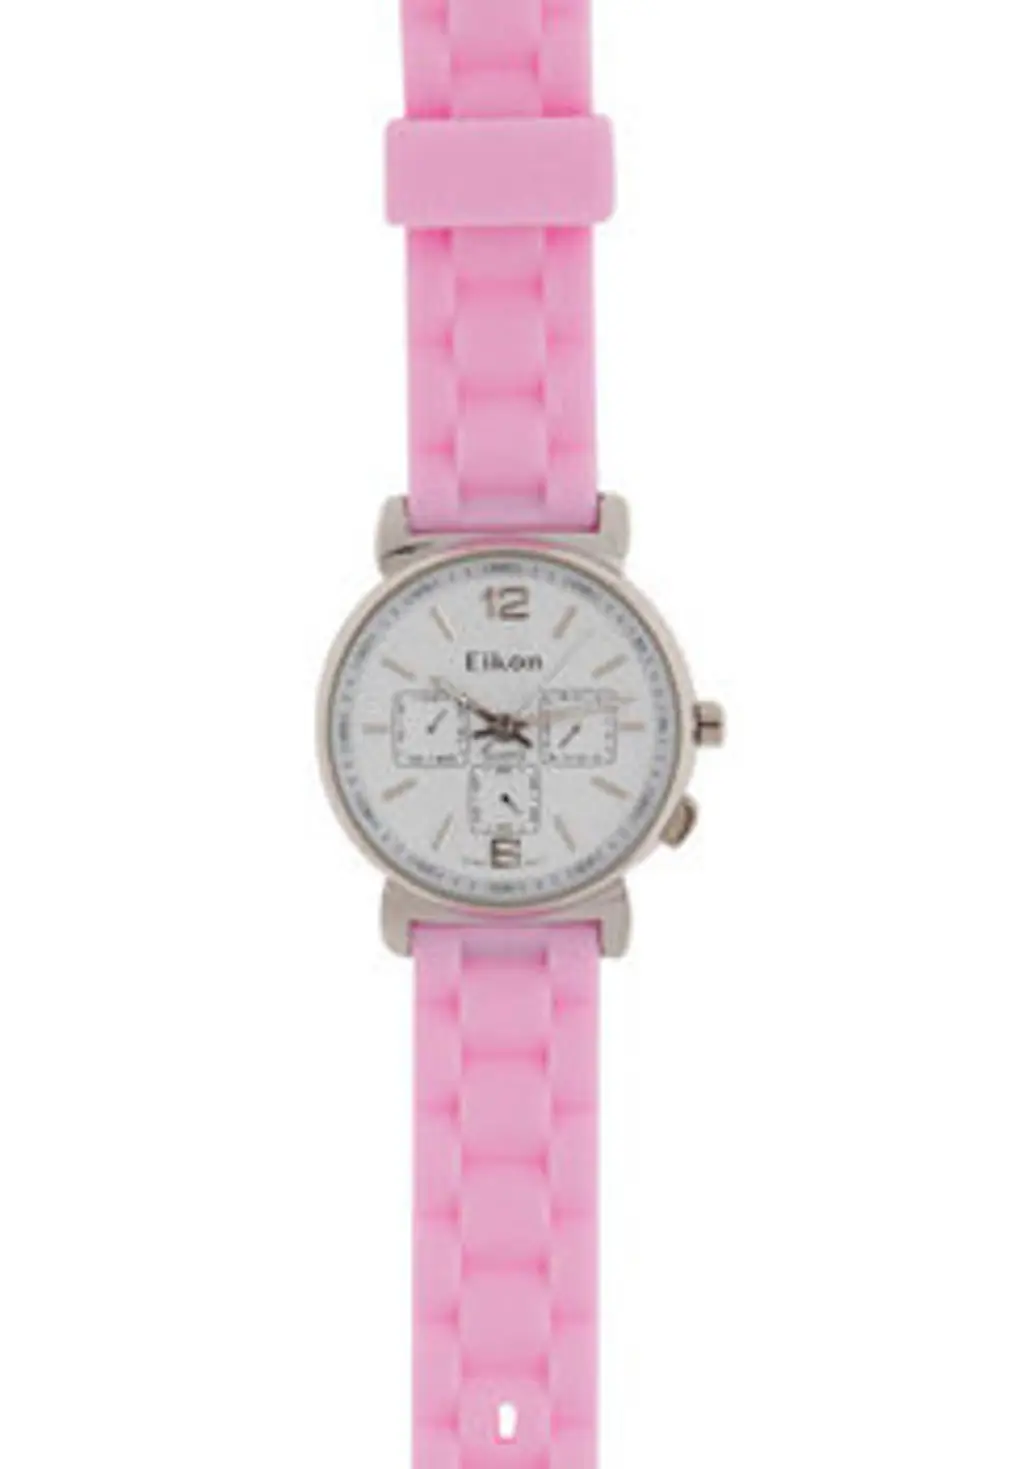 New York Minute Watch in Pink